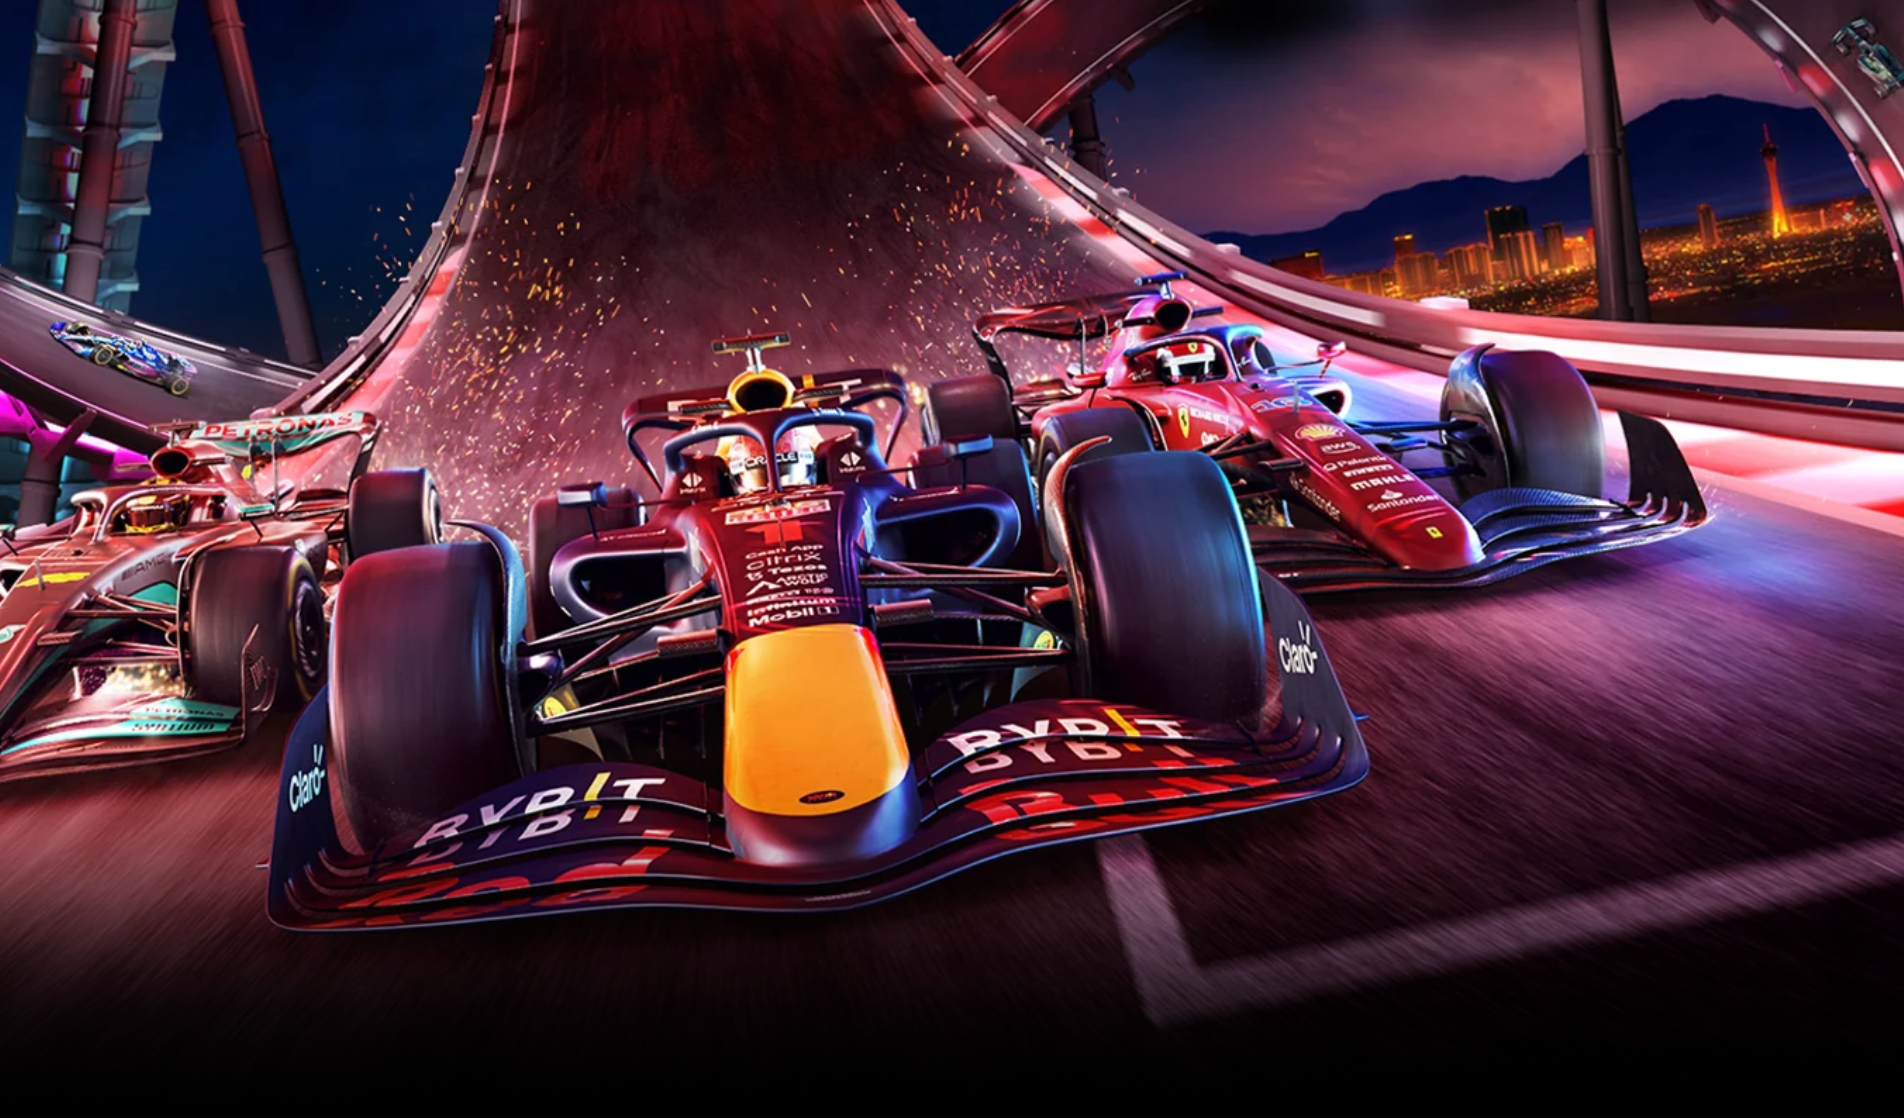 Sky Sports F1 Ultra HD 24/7 channel gets green light for Bahrain Grand Prix  | Trusted Reviews